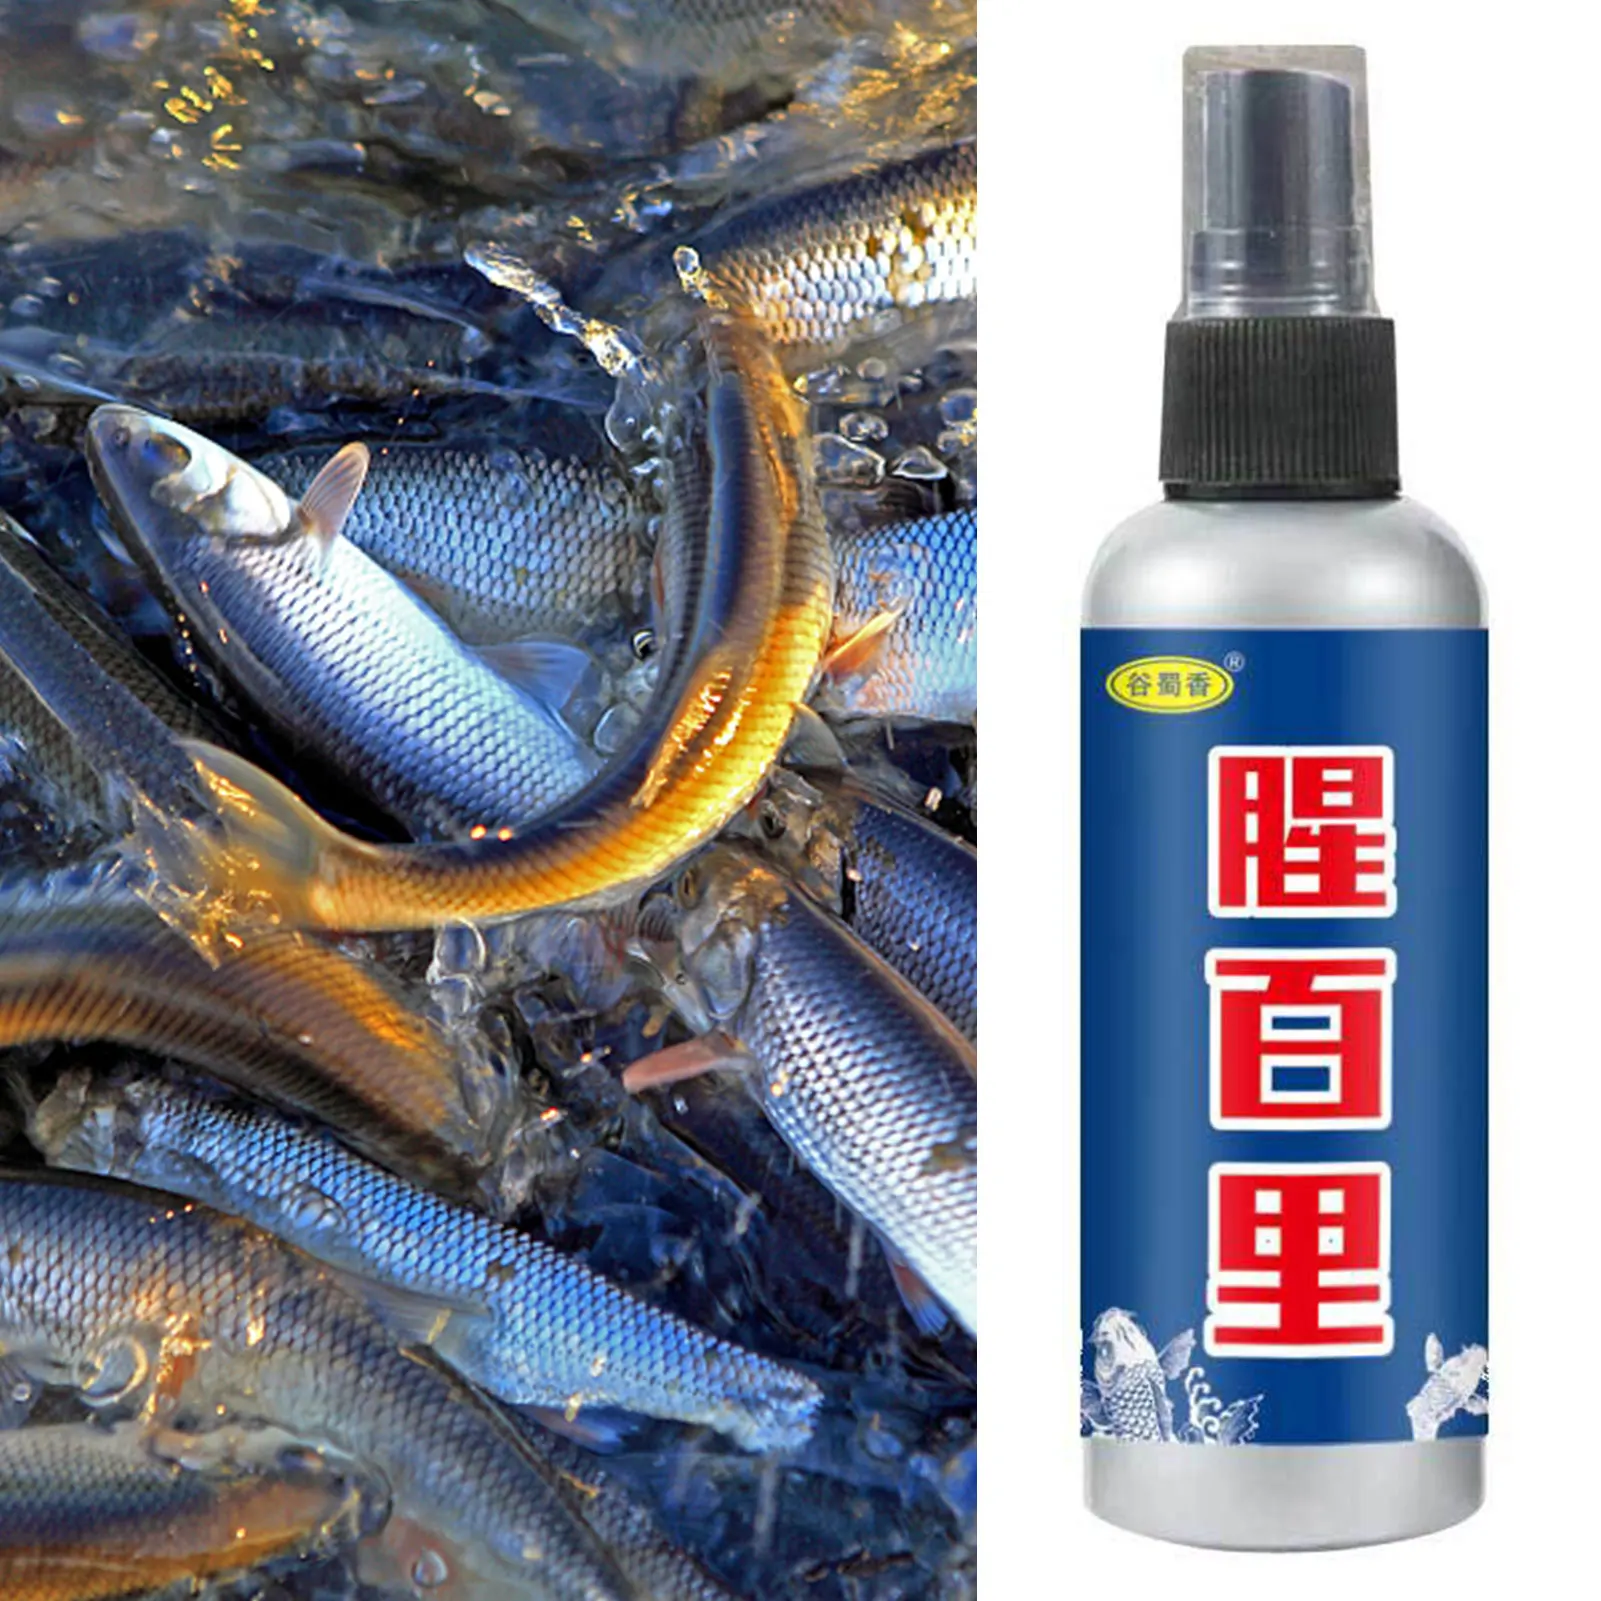 

100ML Fishing Lure Fish Attractant High Density Natural Attractants Eco-Friendly And Efficient Fish Attractant Spray